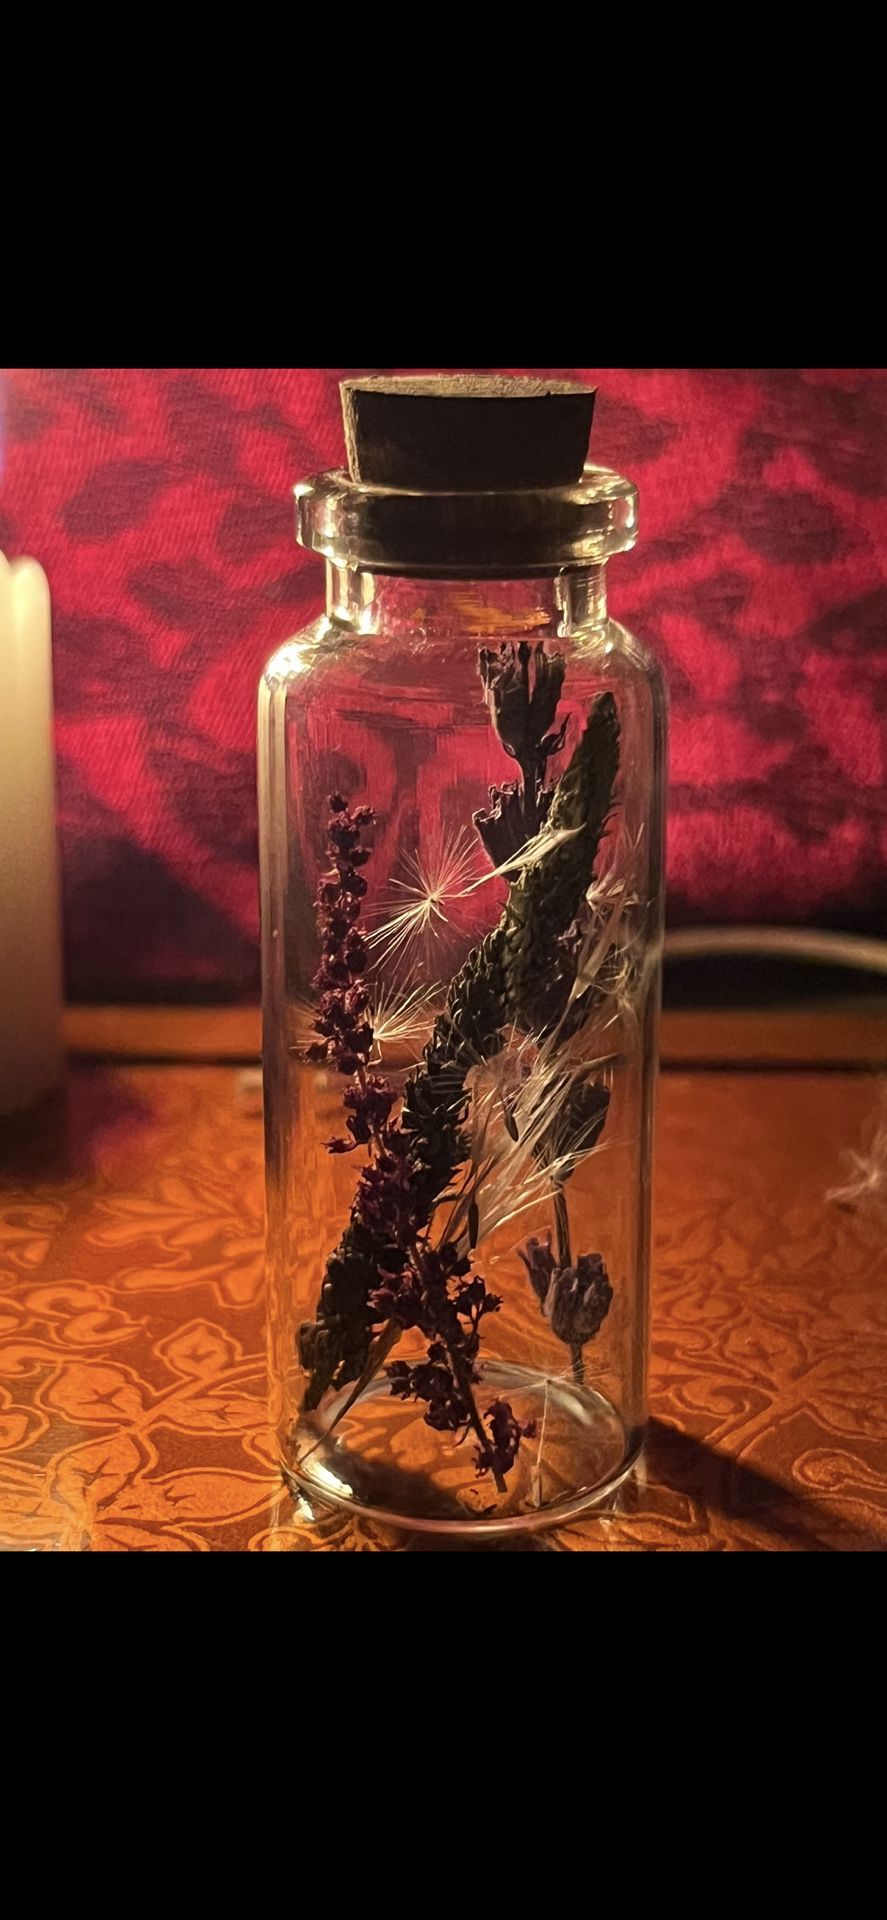  Dried Flower Apothecary Jars